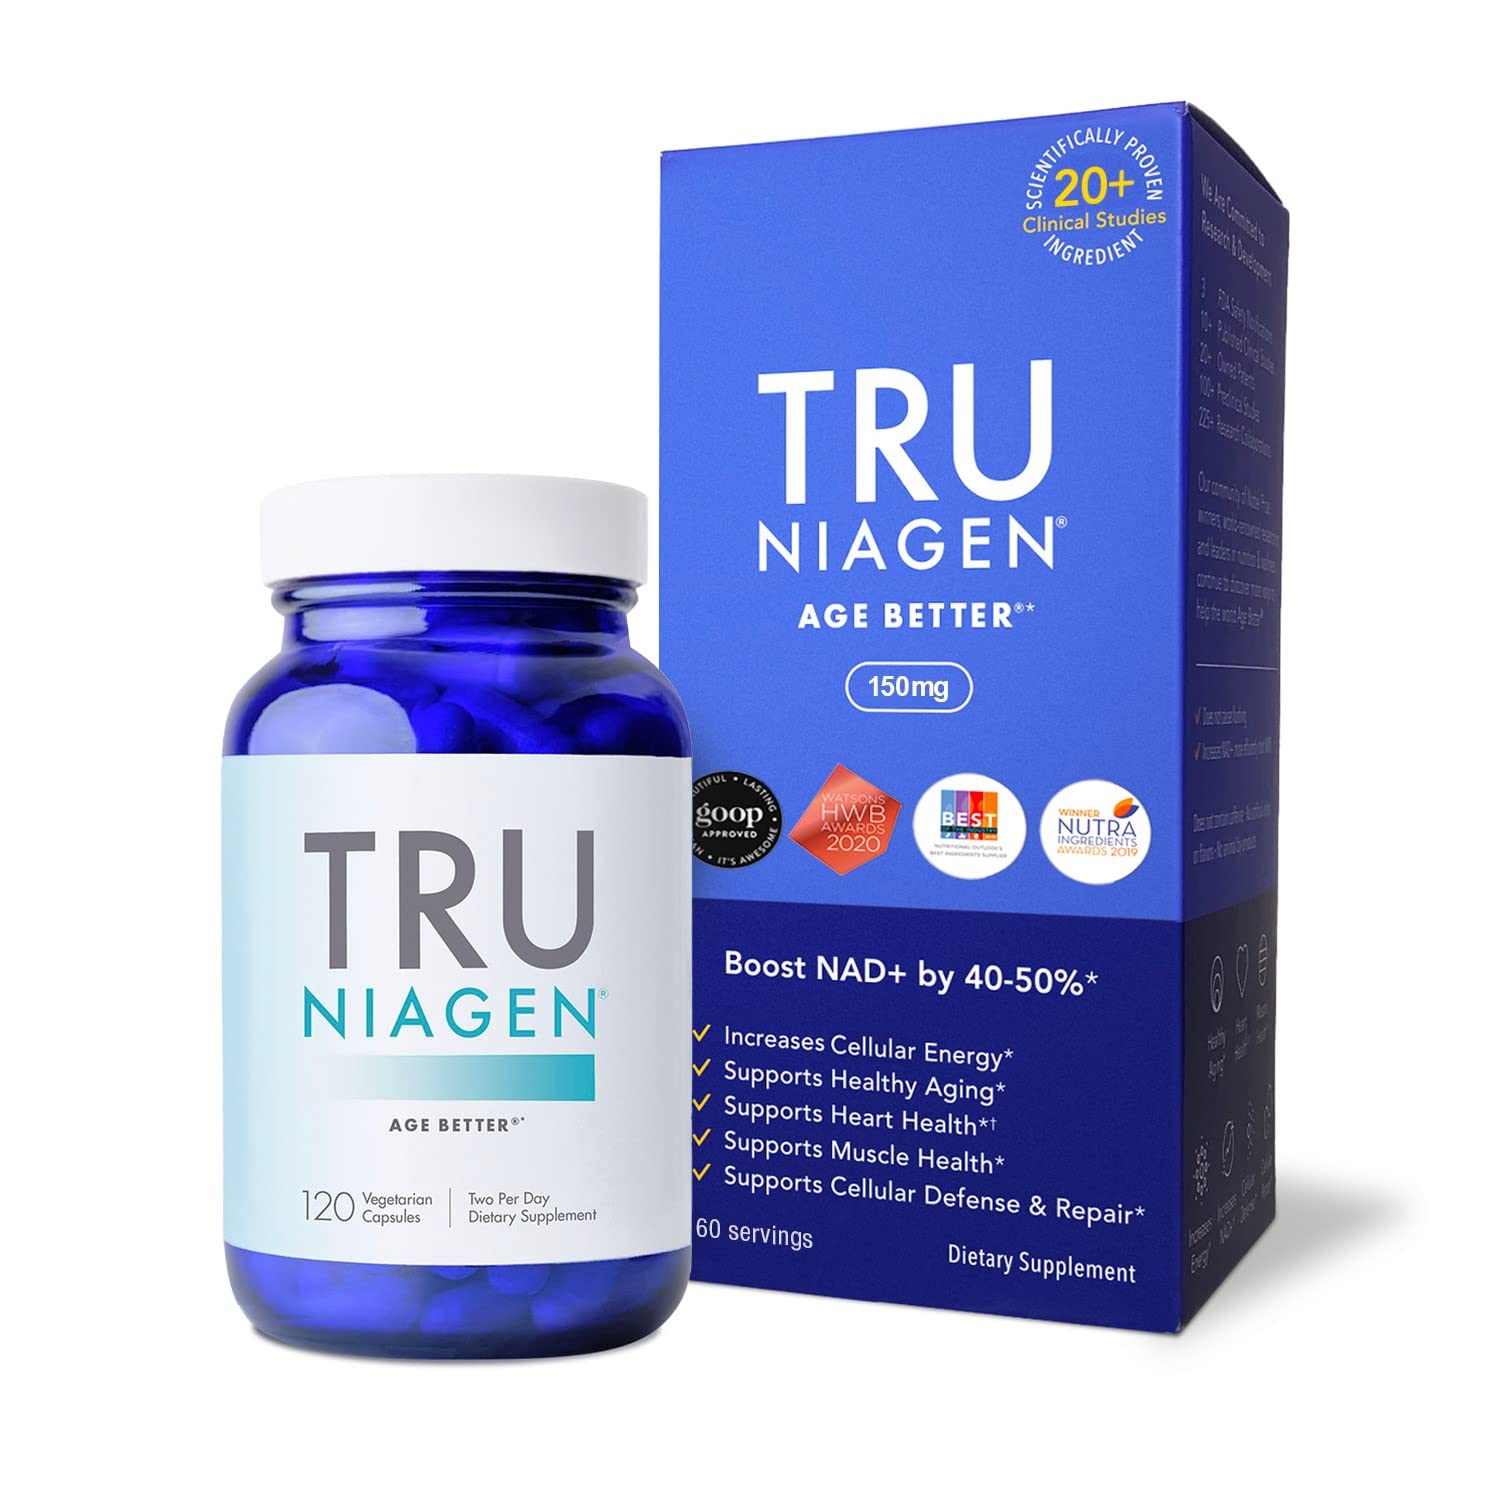 Book Cover TRU NIAGEN 120ct/150mg Multi Award Winning Patented NAD+ Boosting Supplement - More Efficient Than NMN - Nicotinamide Riboside for Cellular Energy Metabolism & Repair, Vitality & Healthy Aging